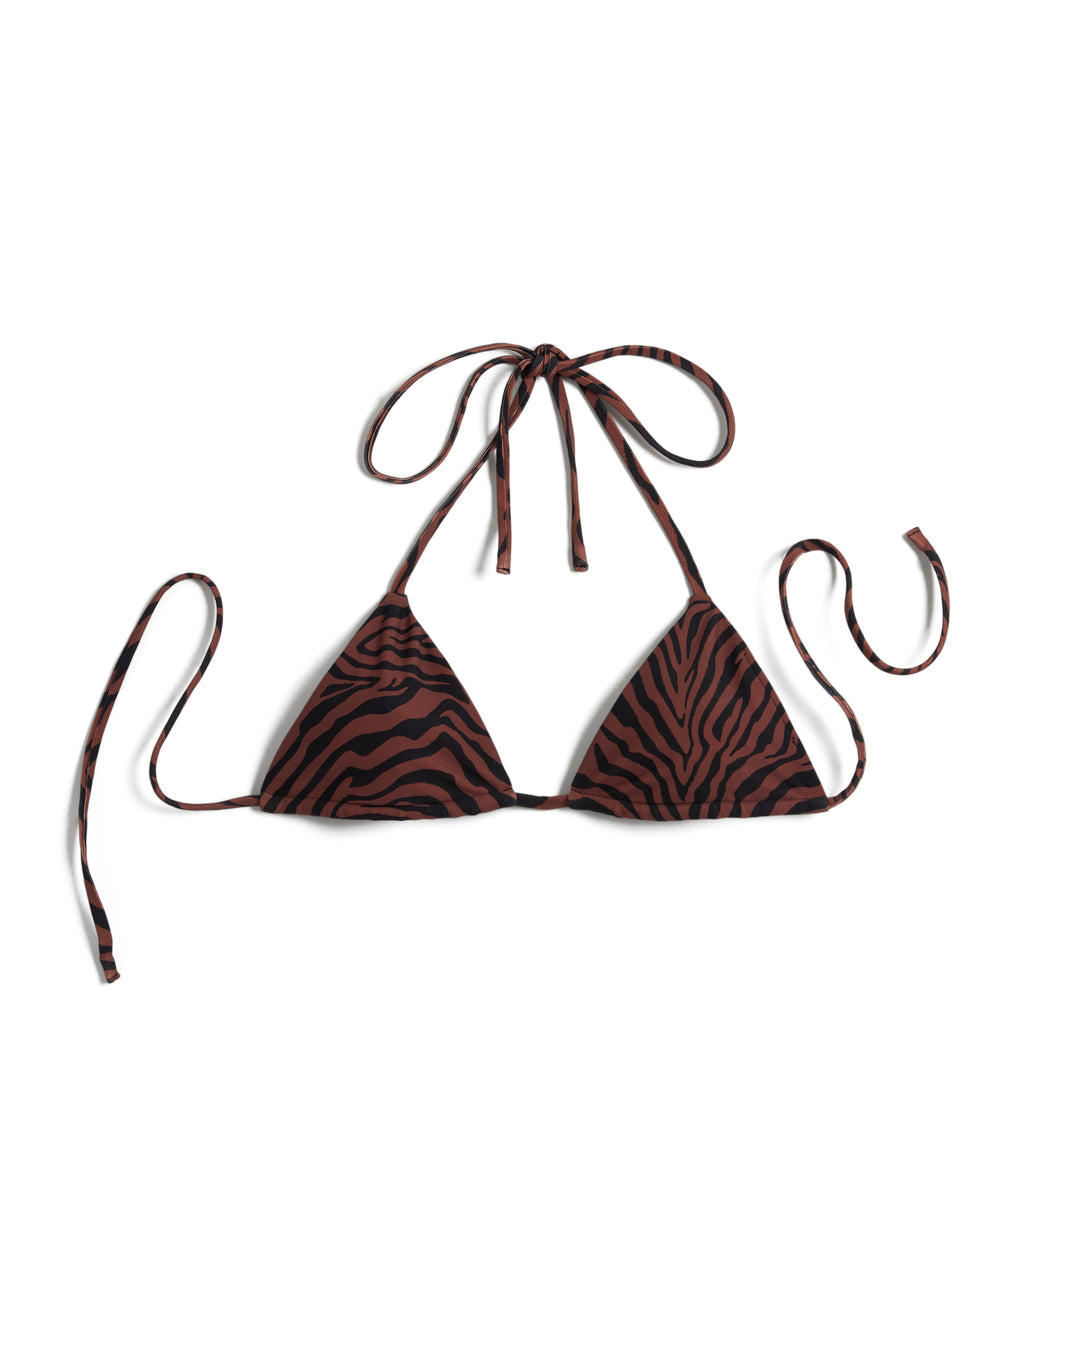 The Hierro Top - Onyx, a brown and black zebra print bikini top with adjustable halter neck and back ties from Dandy Del Mar, embodies minimalist design. Laid flat on a white surface, it promises UV bliss for your sun-soaked days.